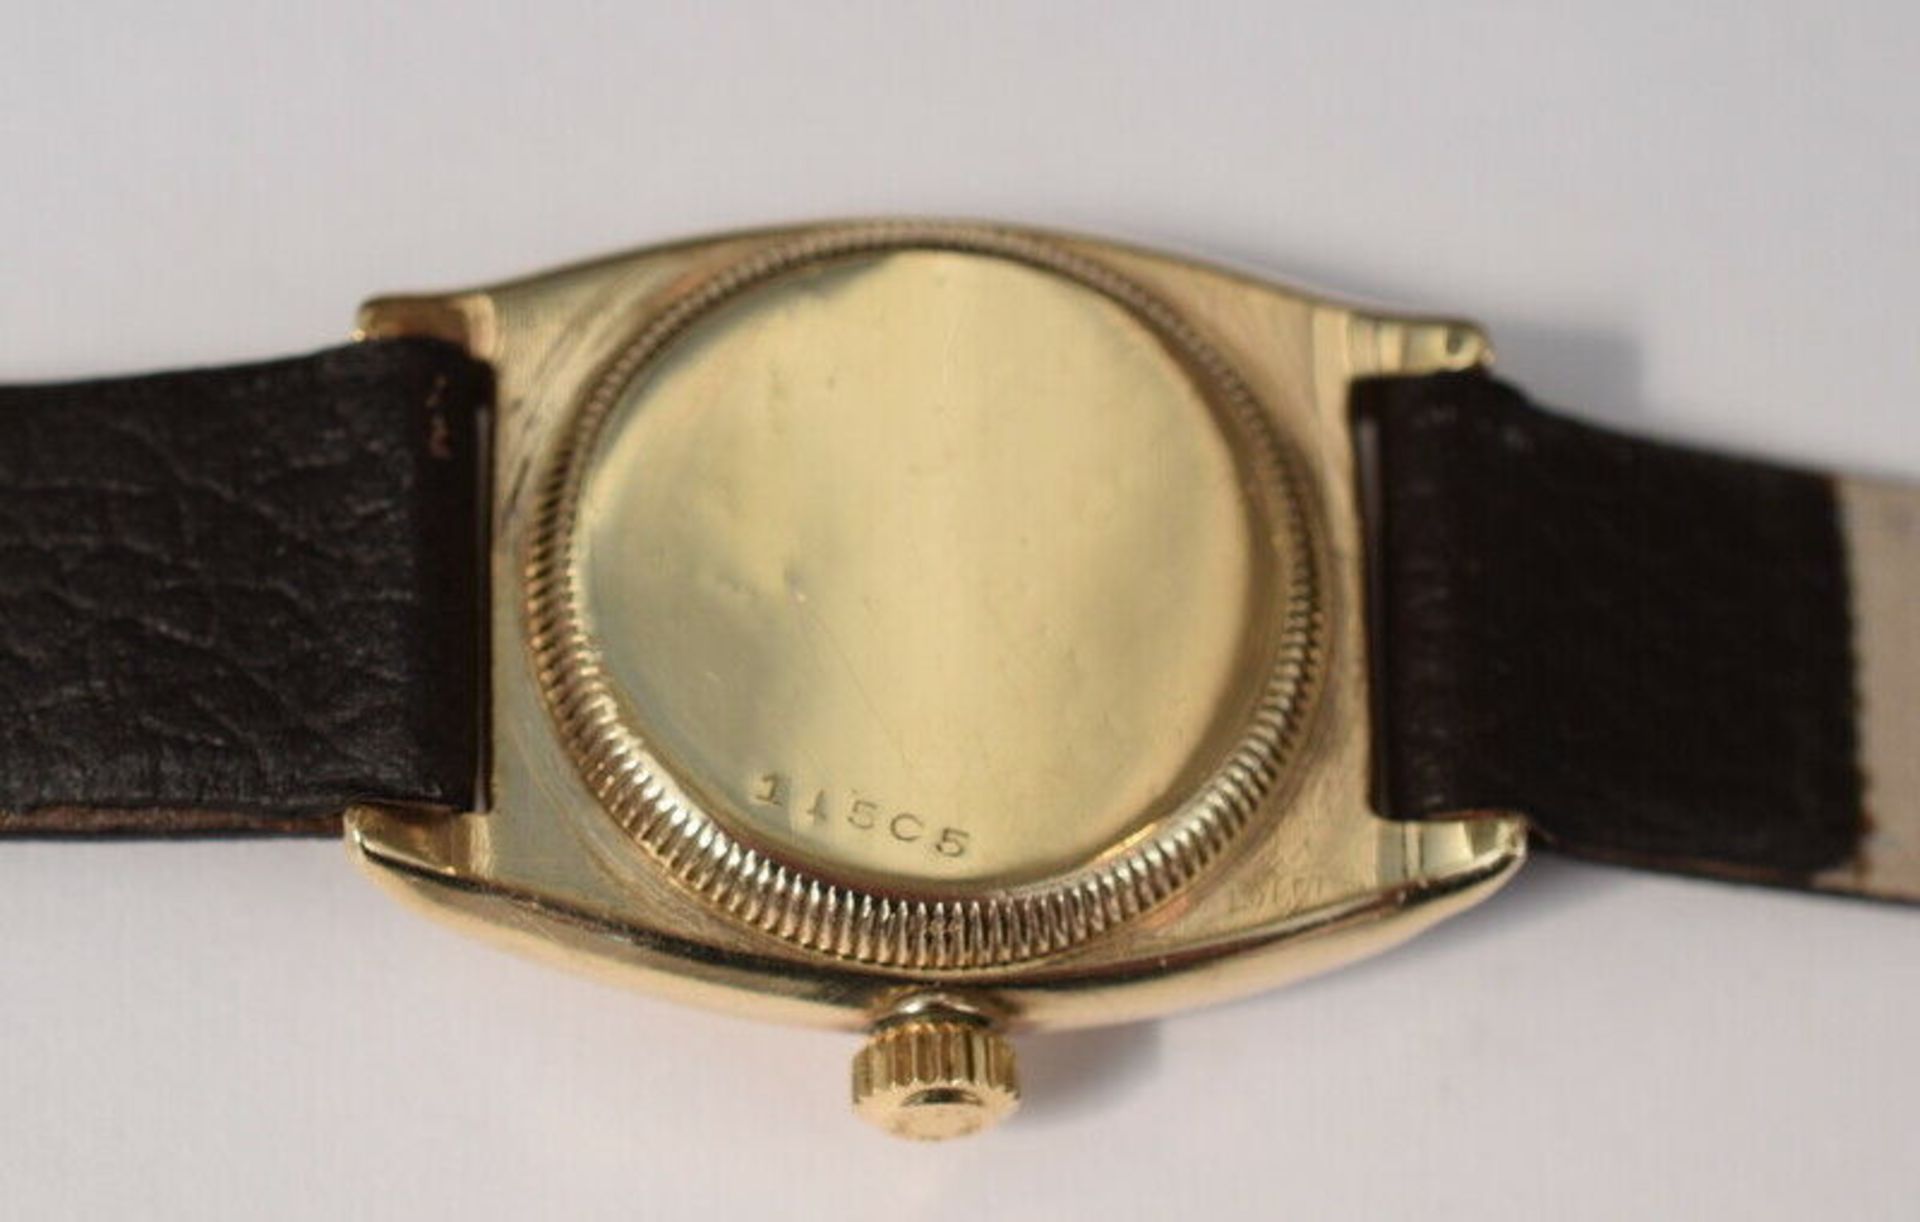 Rare Black Dial Rolex Oyster Viceroy 9ct Gold 1933 Chronometer - Image 10 of 11